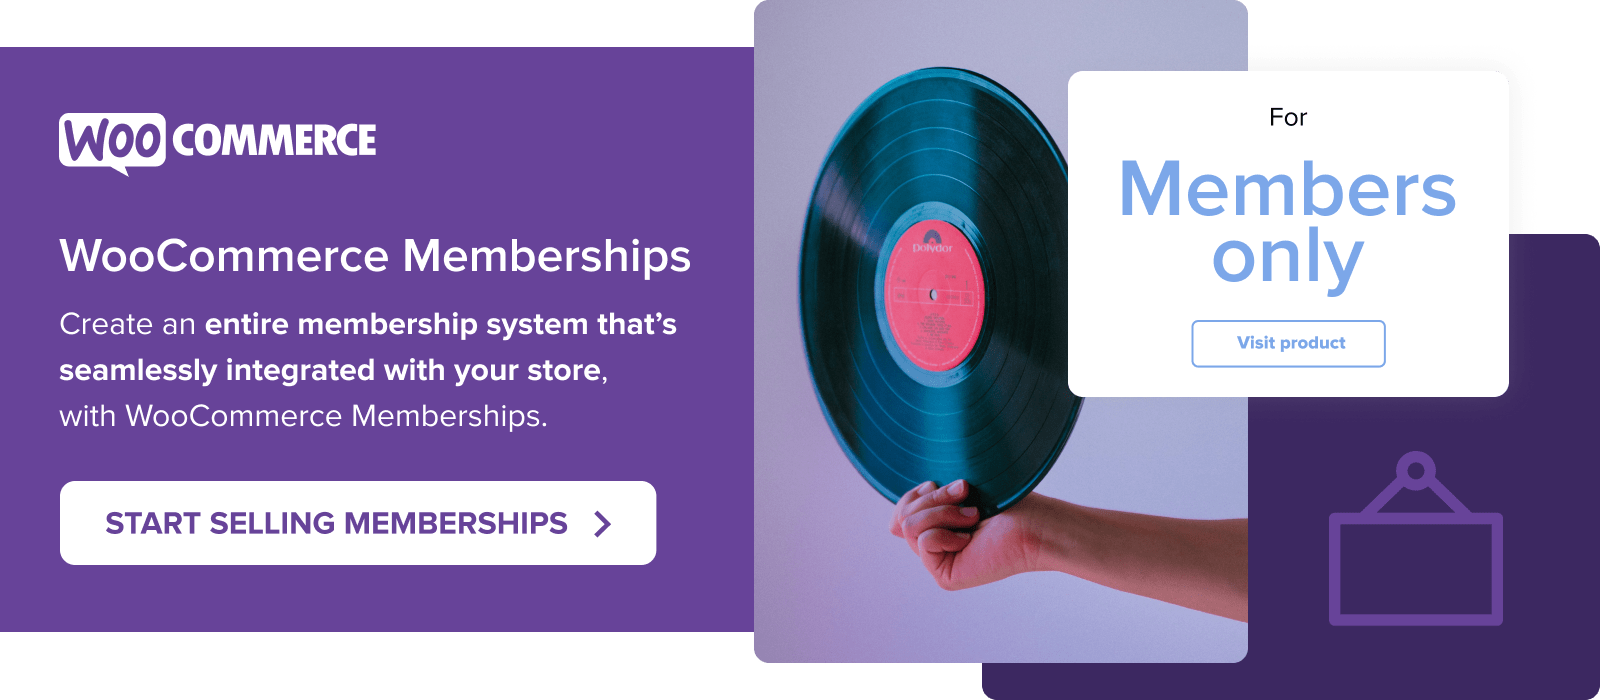 Create a membership system that's integrated with your store using WooCommerce Memberships